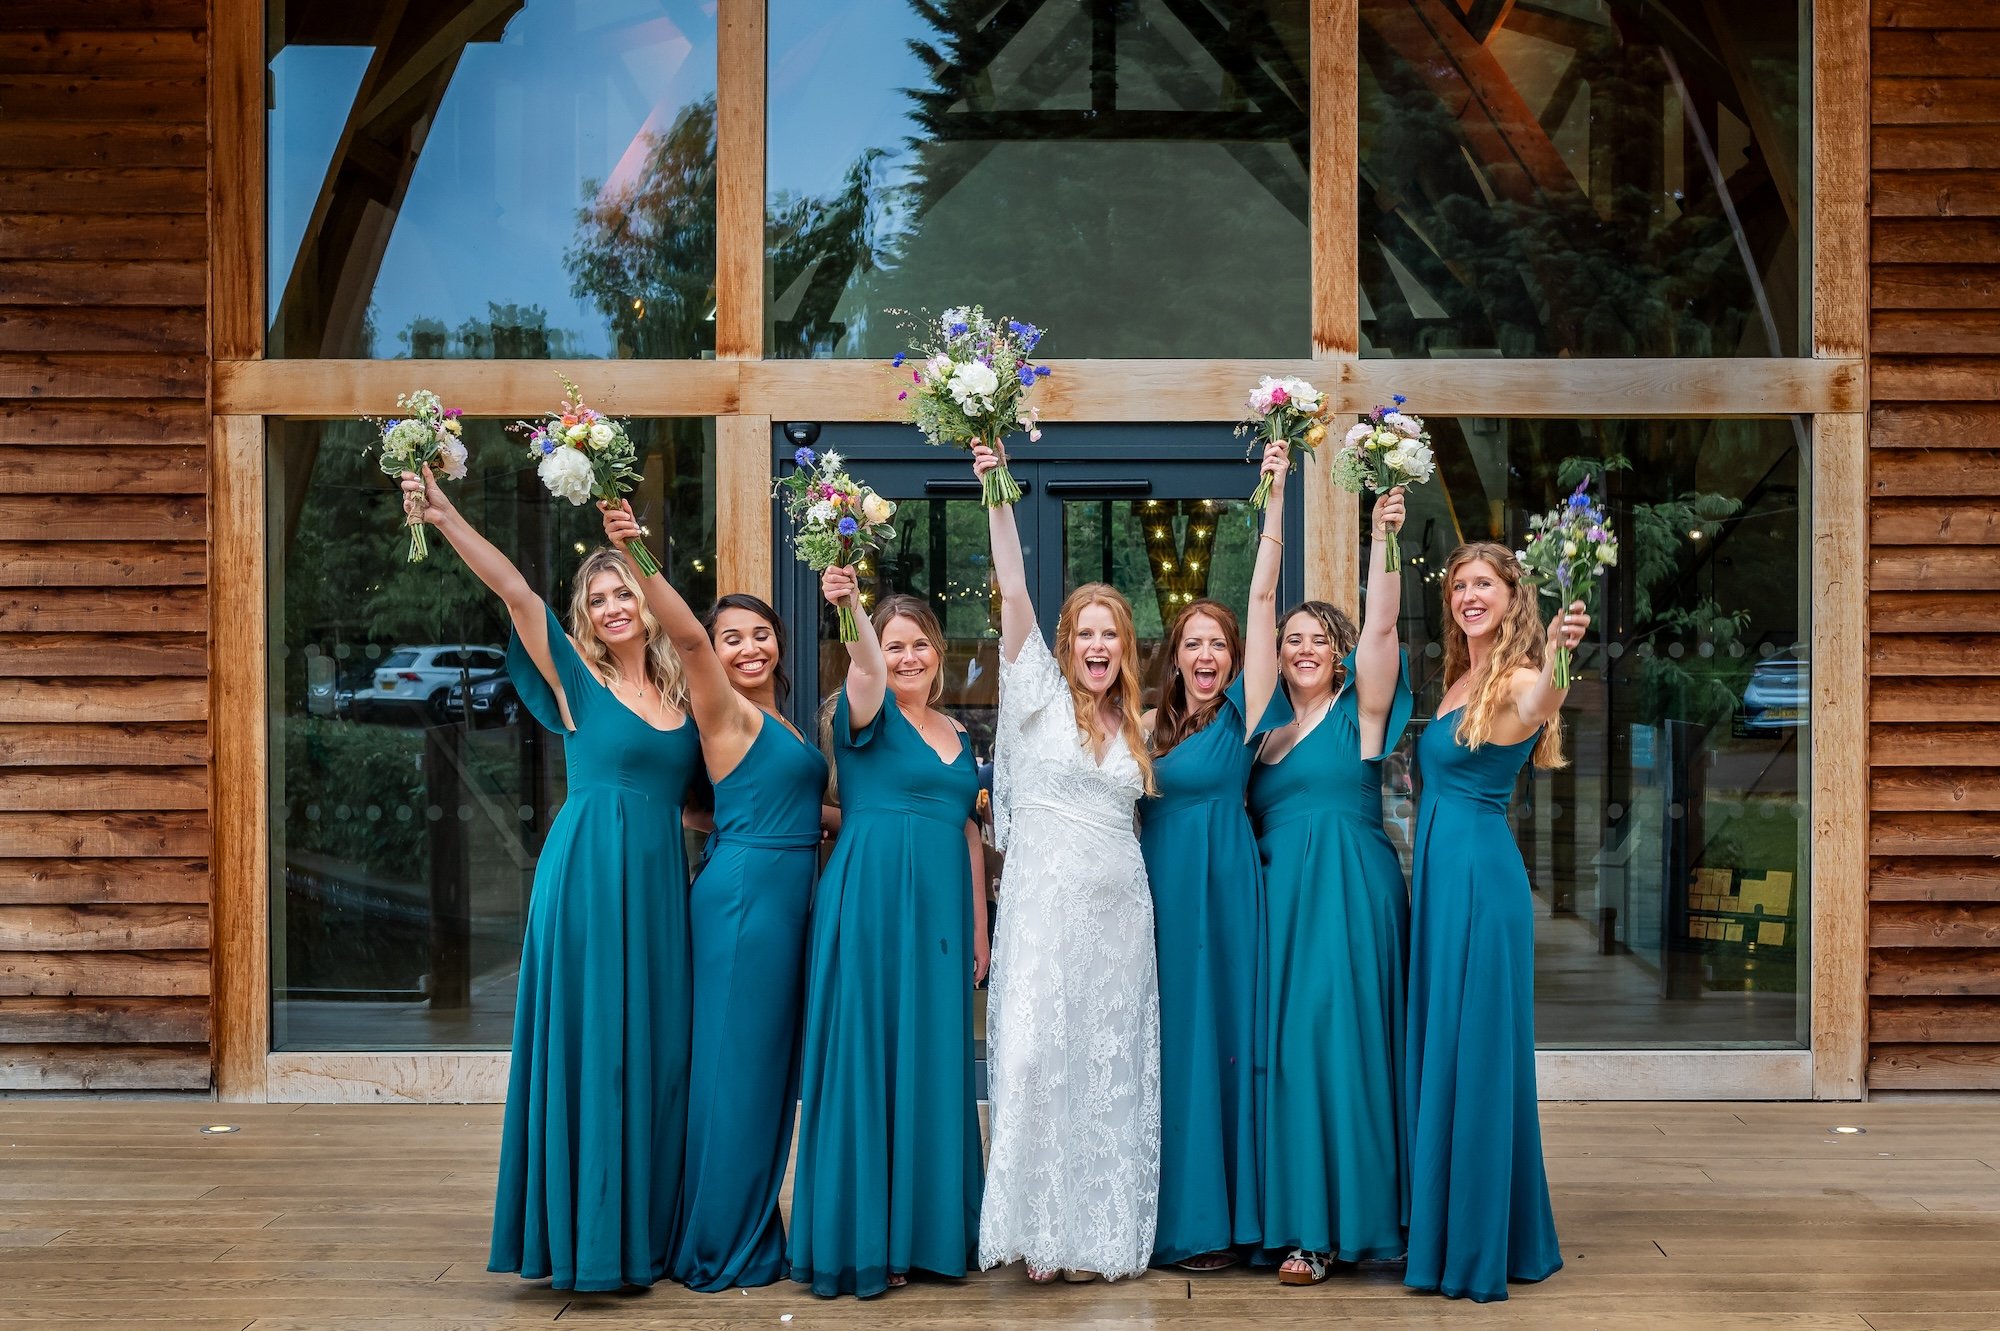 Rhian and her bridesmaids on the footbridge at The Mill Barns Wedding Venue